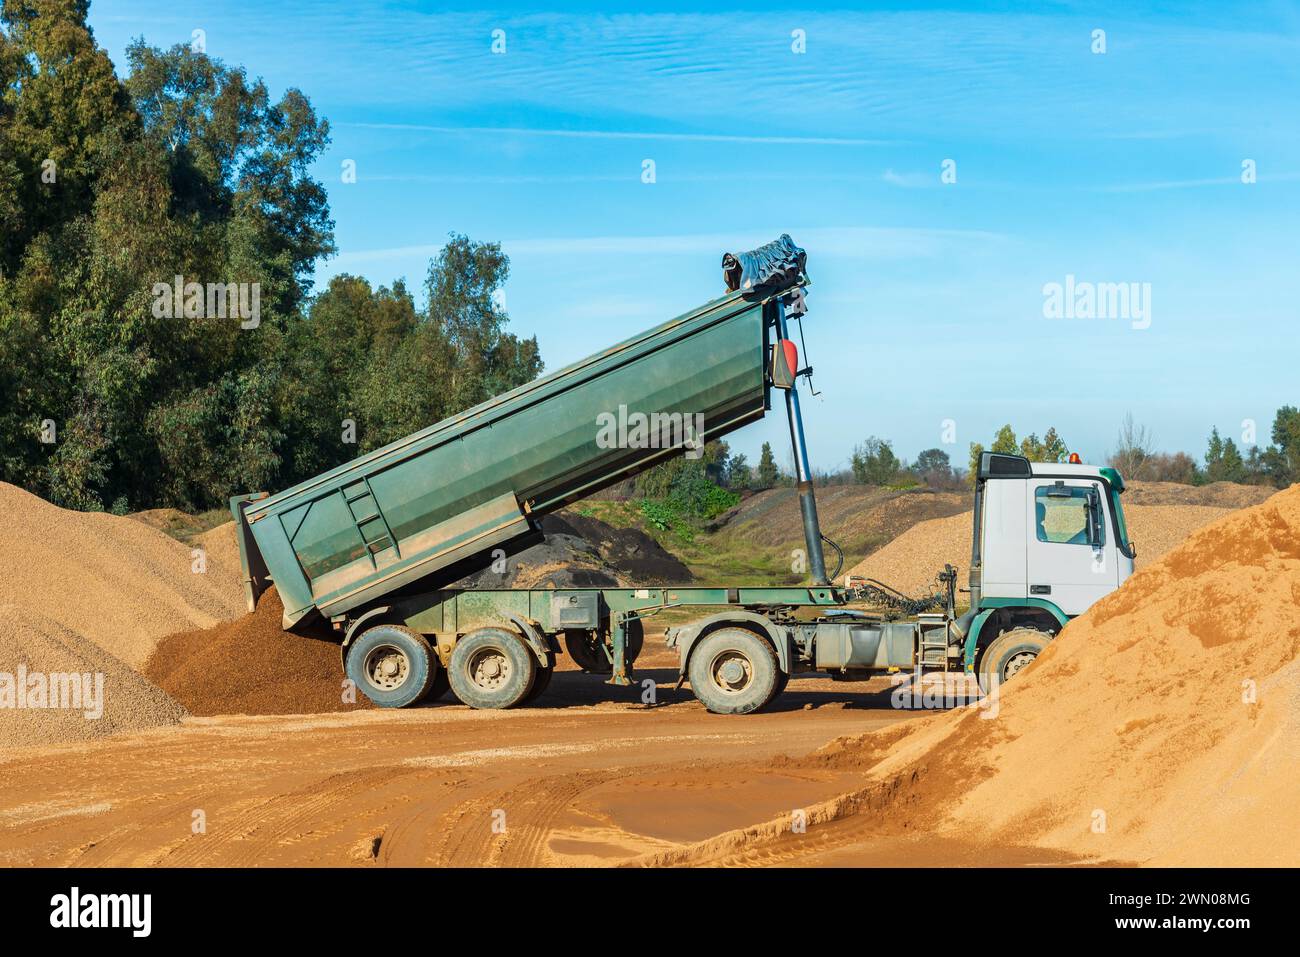 Tilting truck for transporting aggregates with the raised box unloading sand in a quarry. Stock Photo